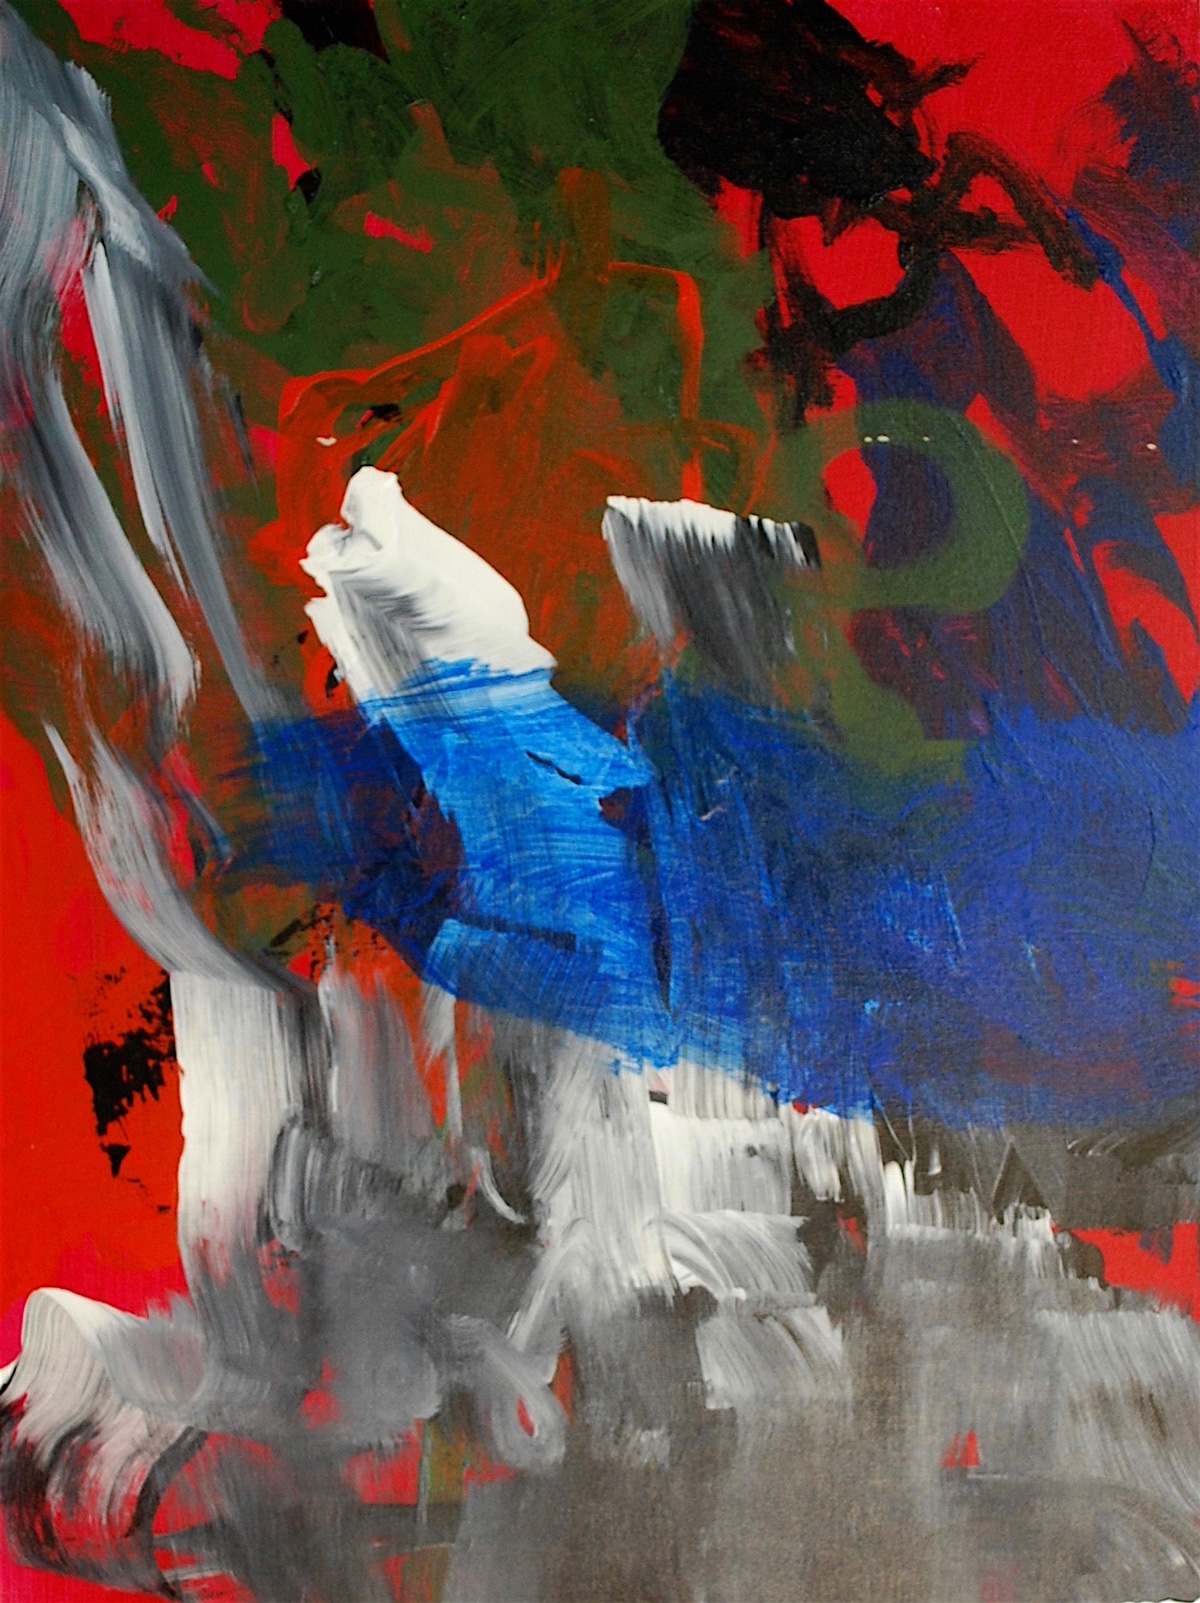 Painting: Large grey, white, blue, green, and black strokes on a red background.